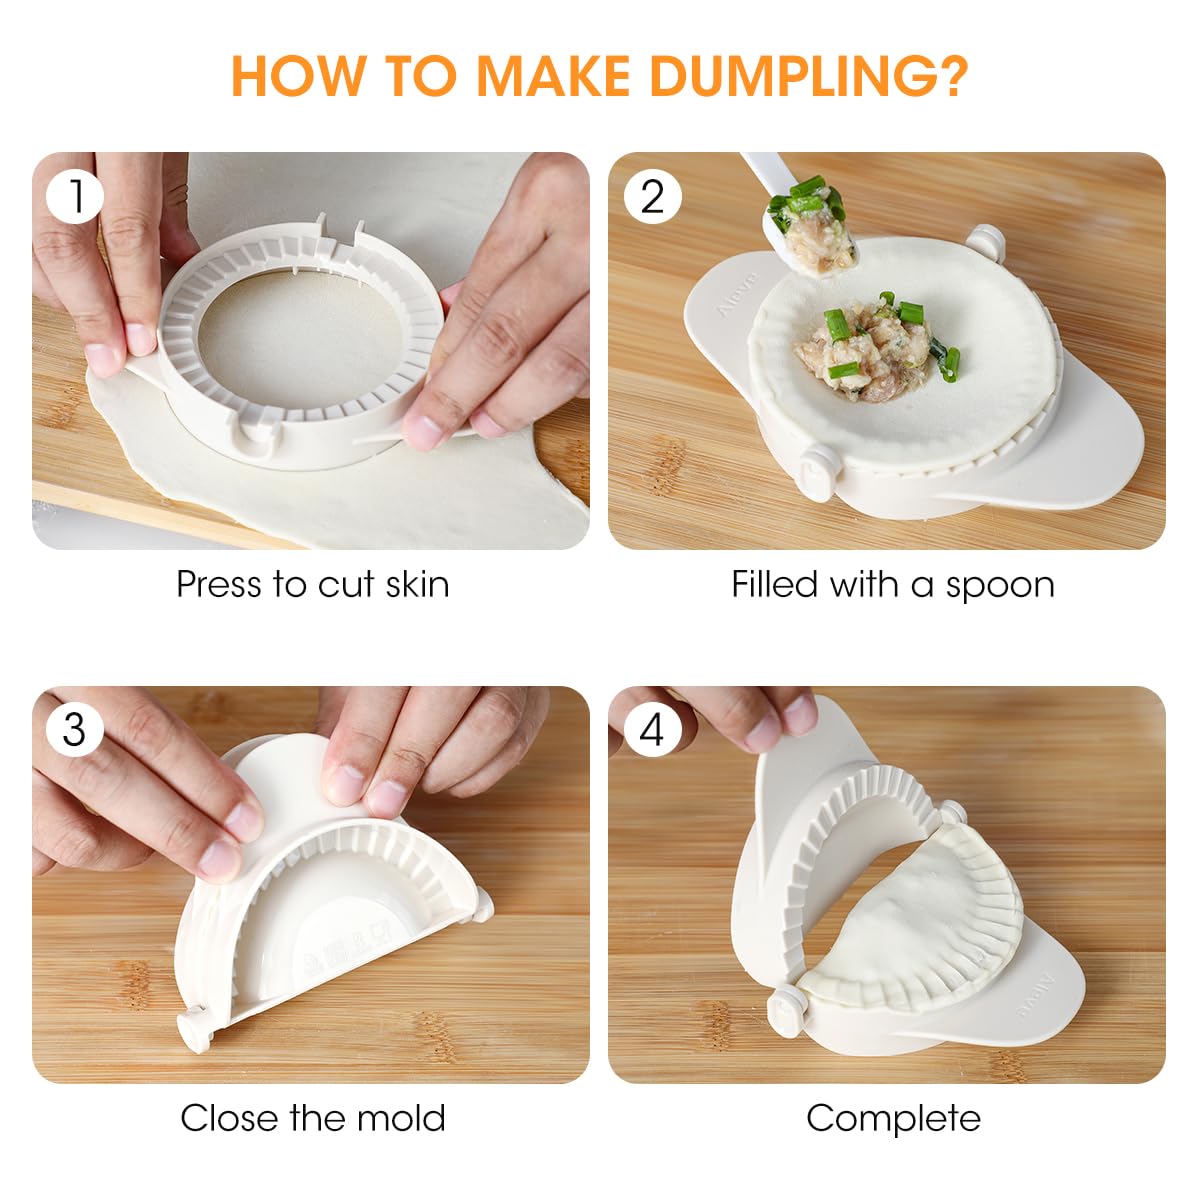 how to make dumping:1.press to cut skin. 2.filled with a spoon. 3.close the mold 4. complete